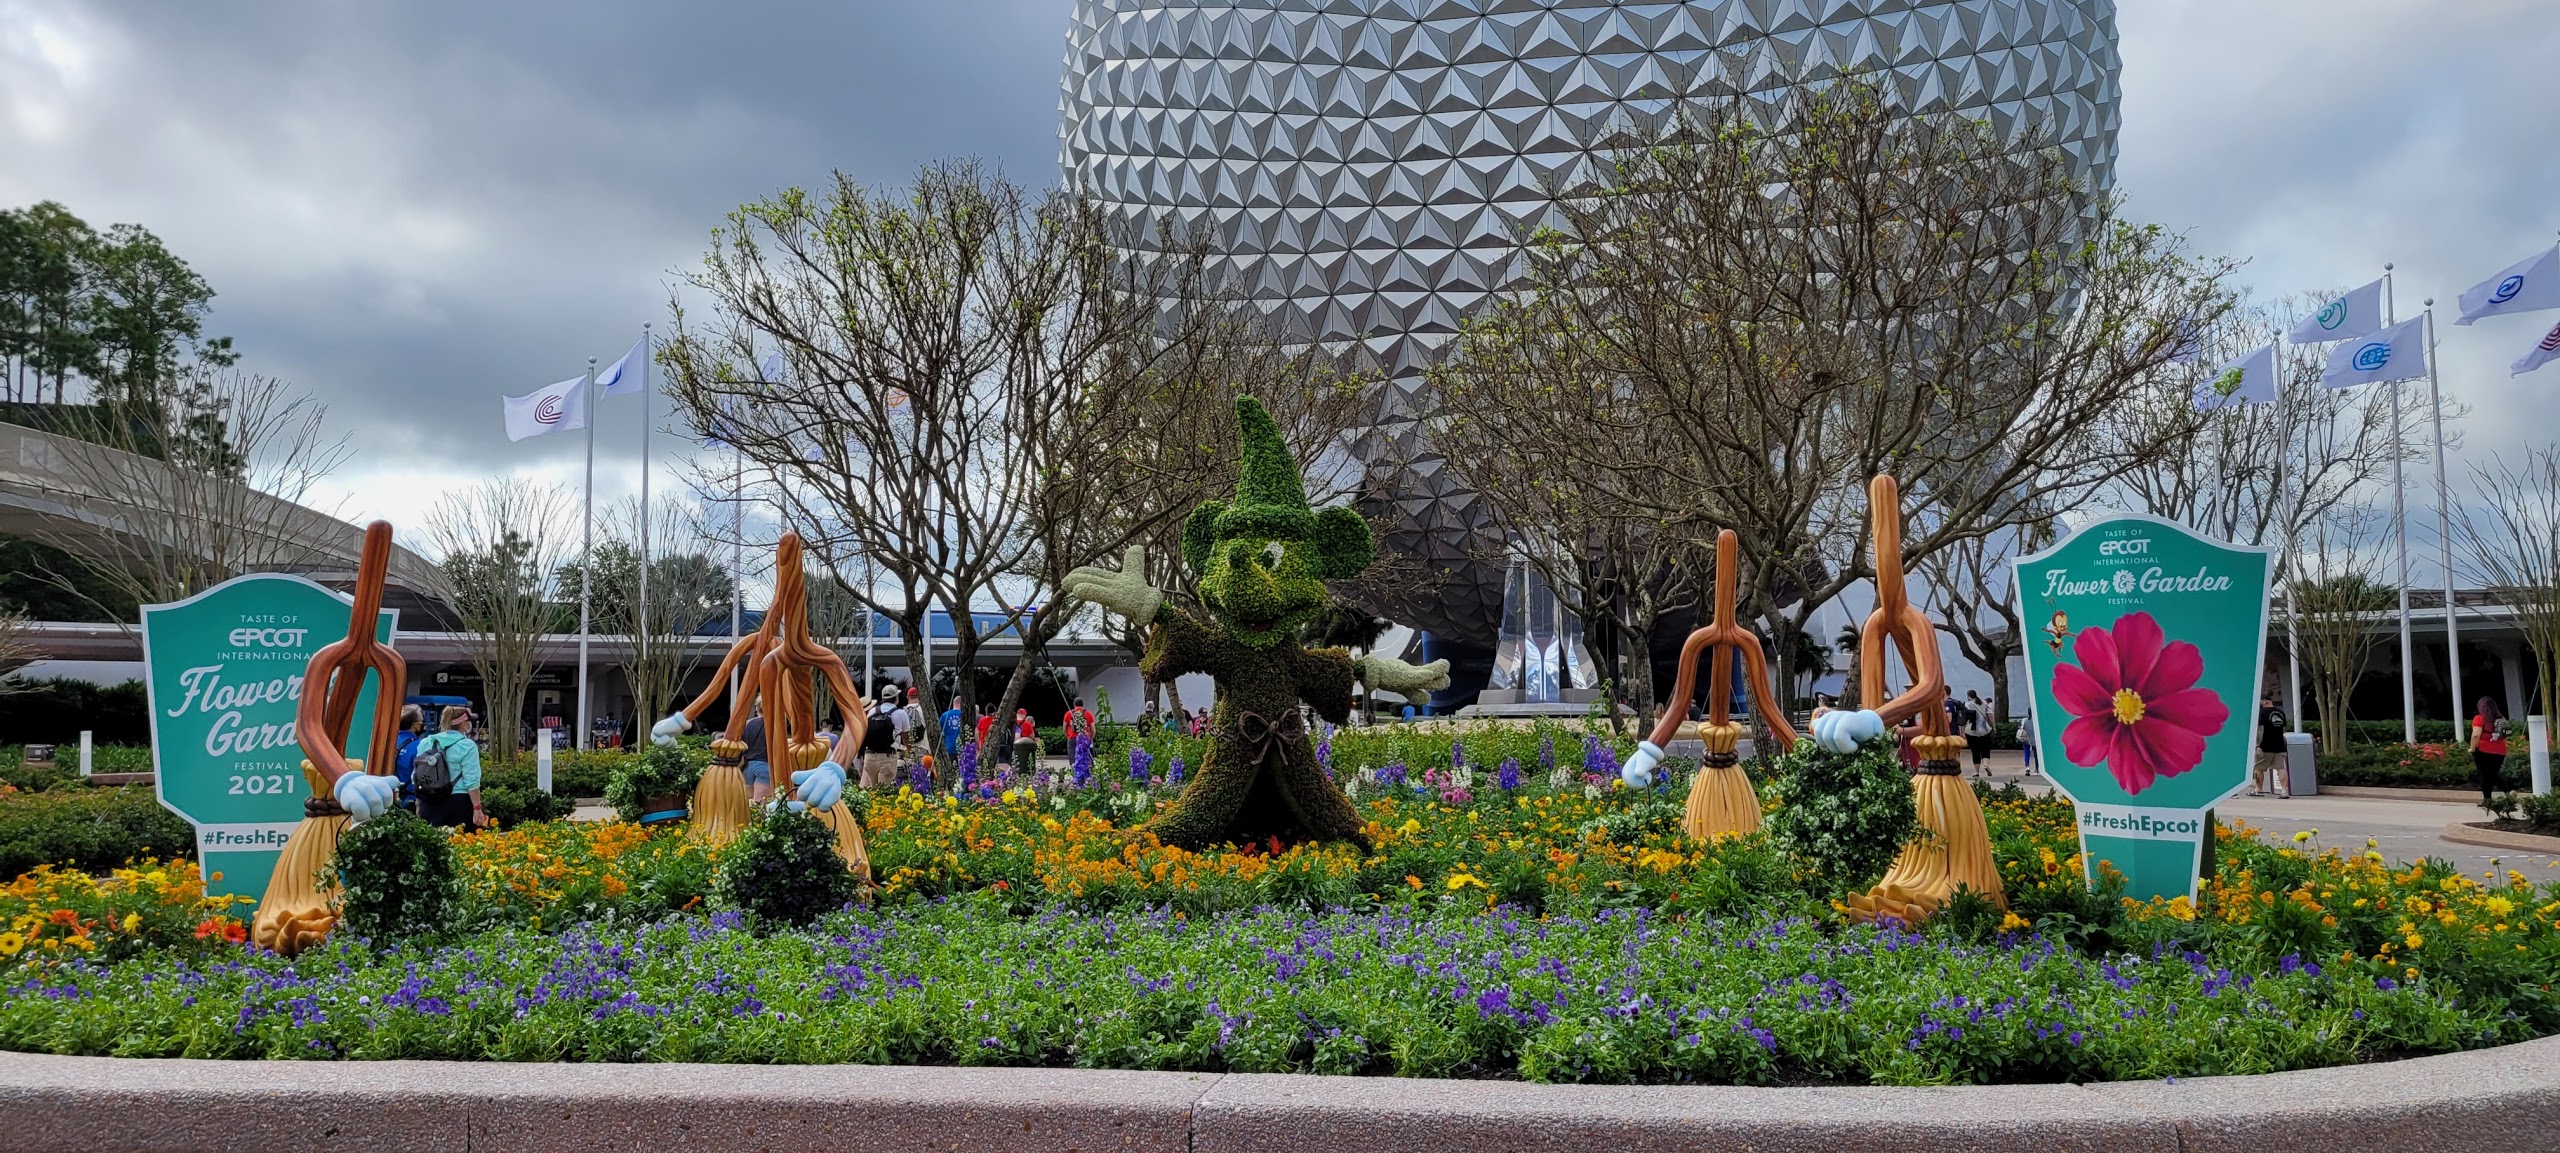 Listen to the New Entry Music in Epcot